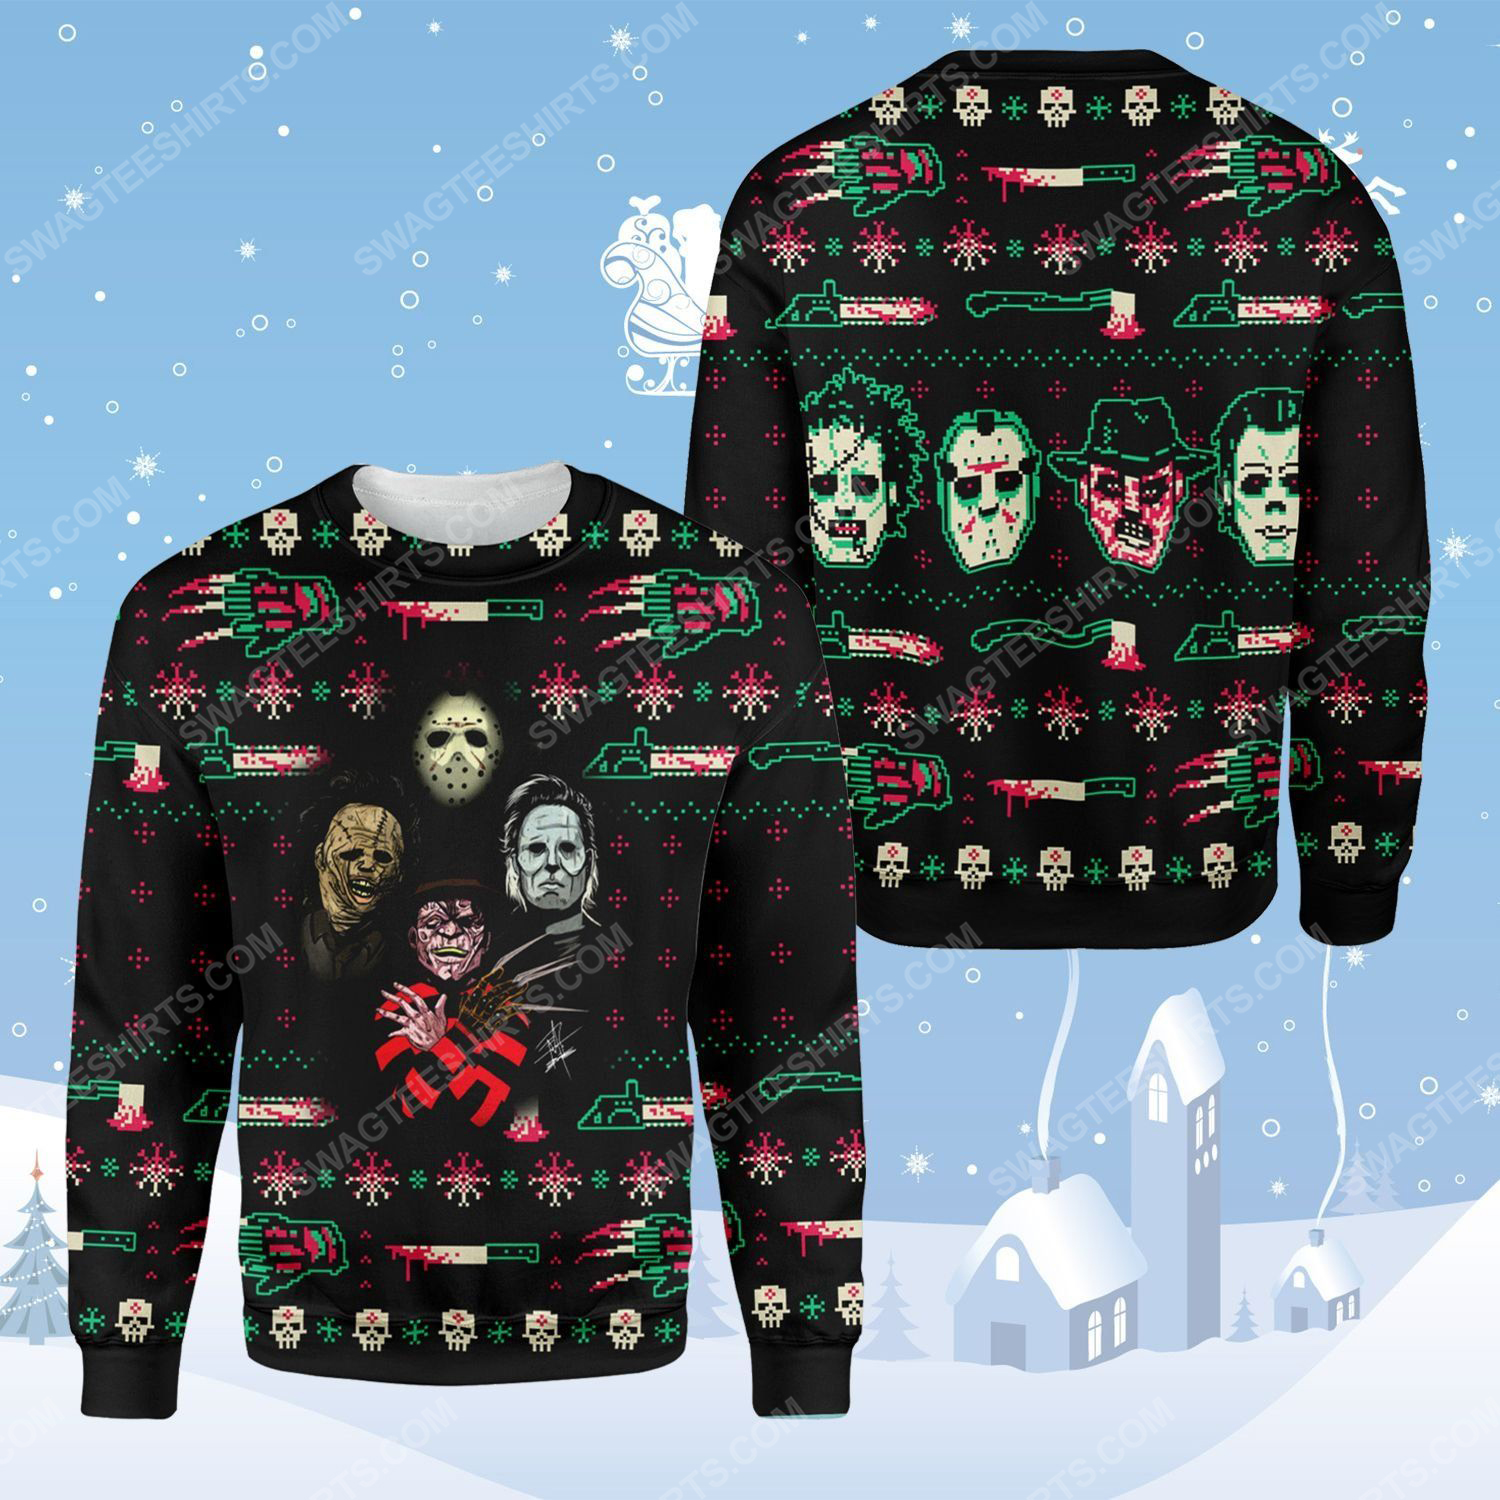 Halloween horror movie killers ​ugly christmas sweater - Copy (2)